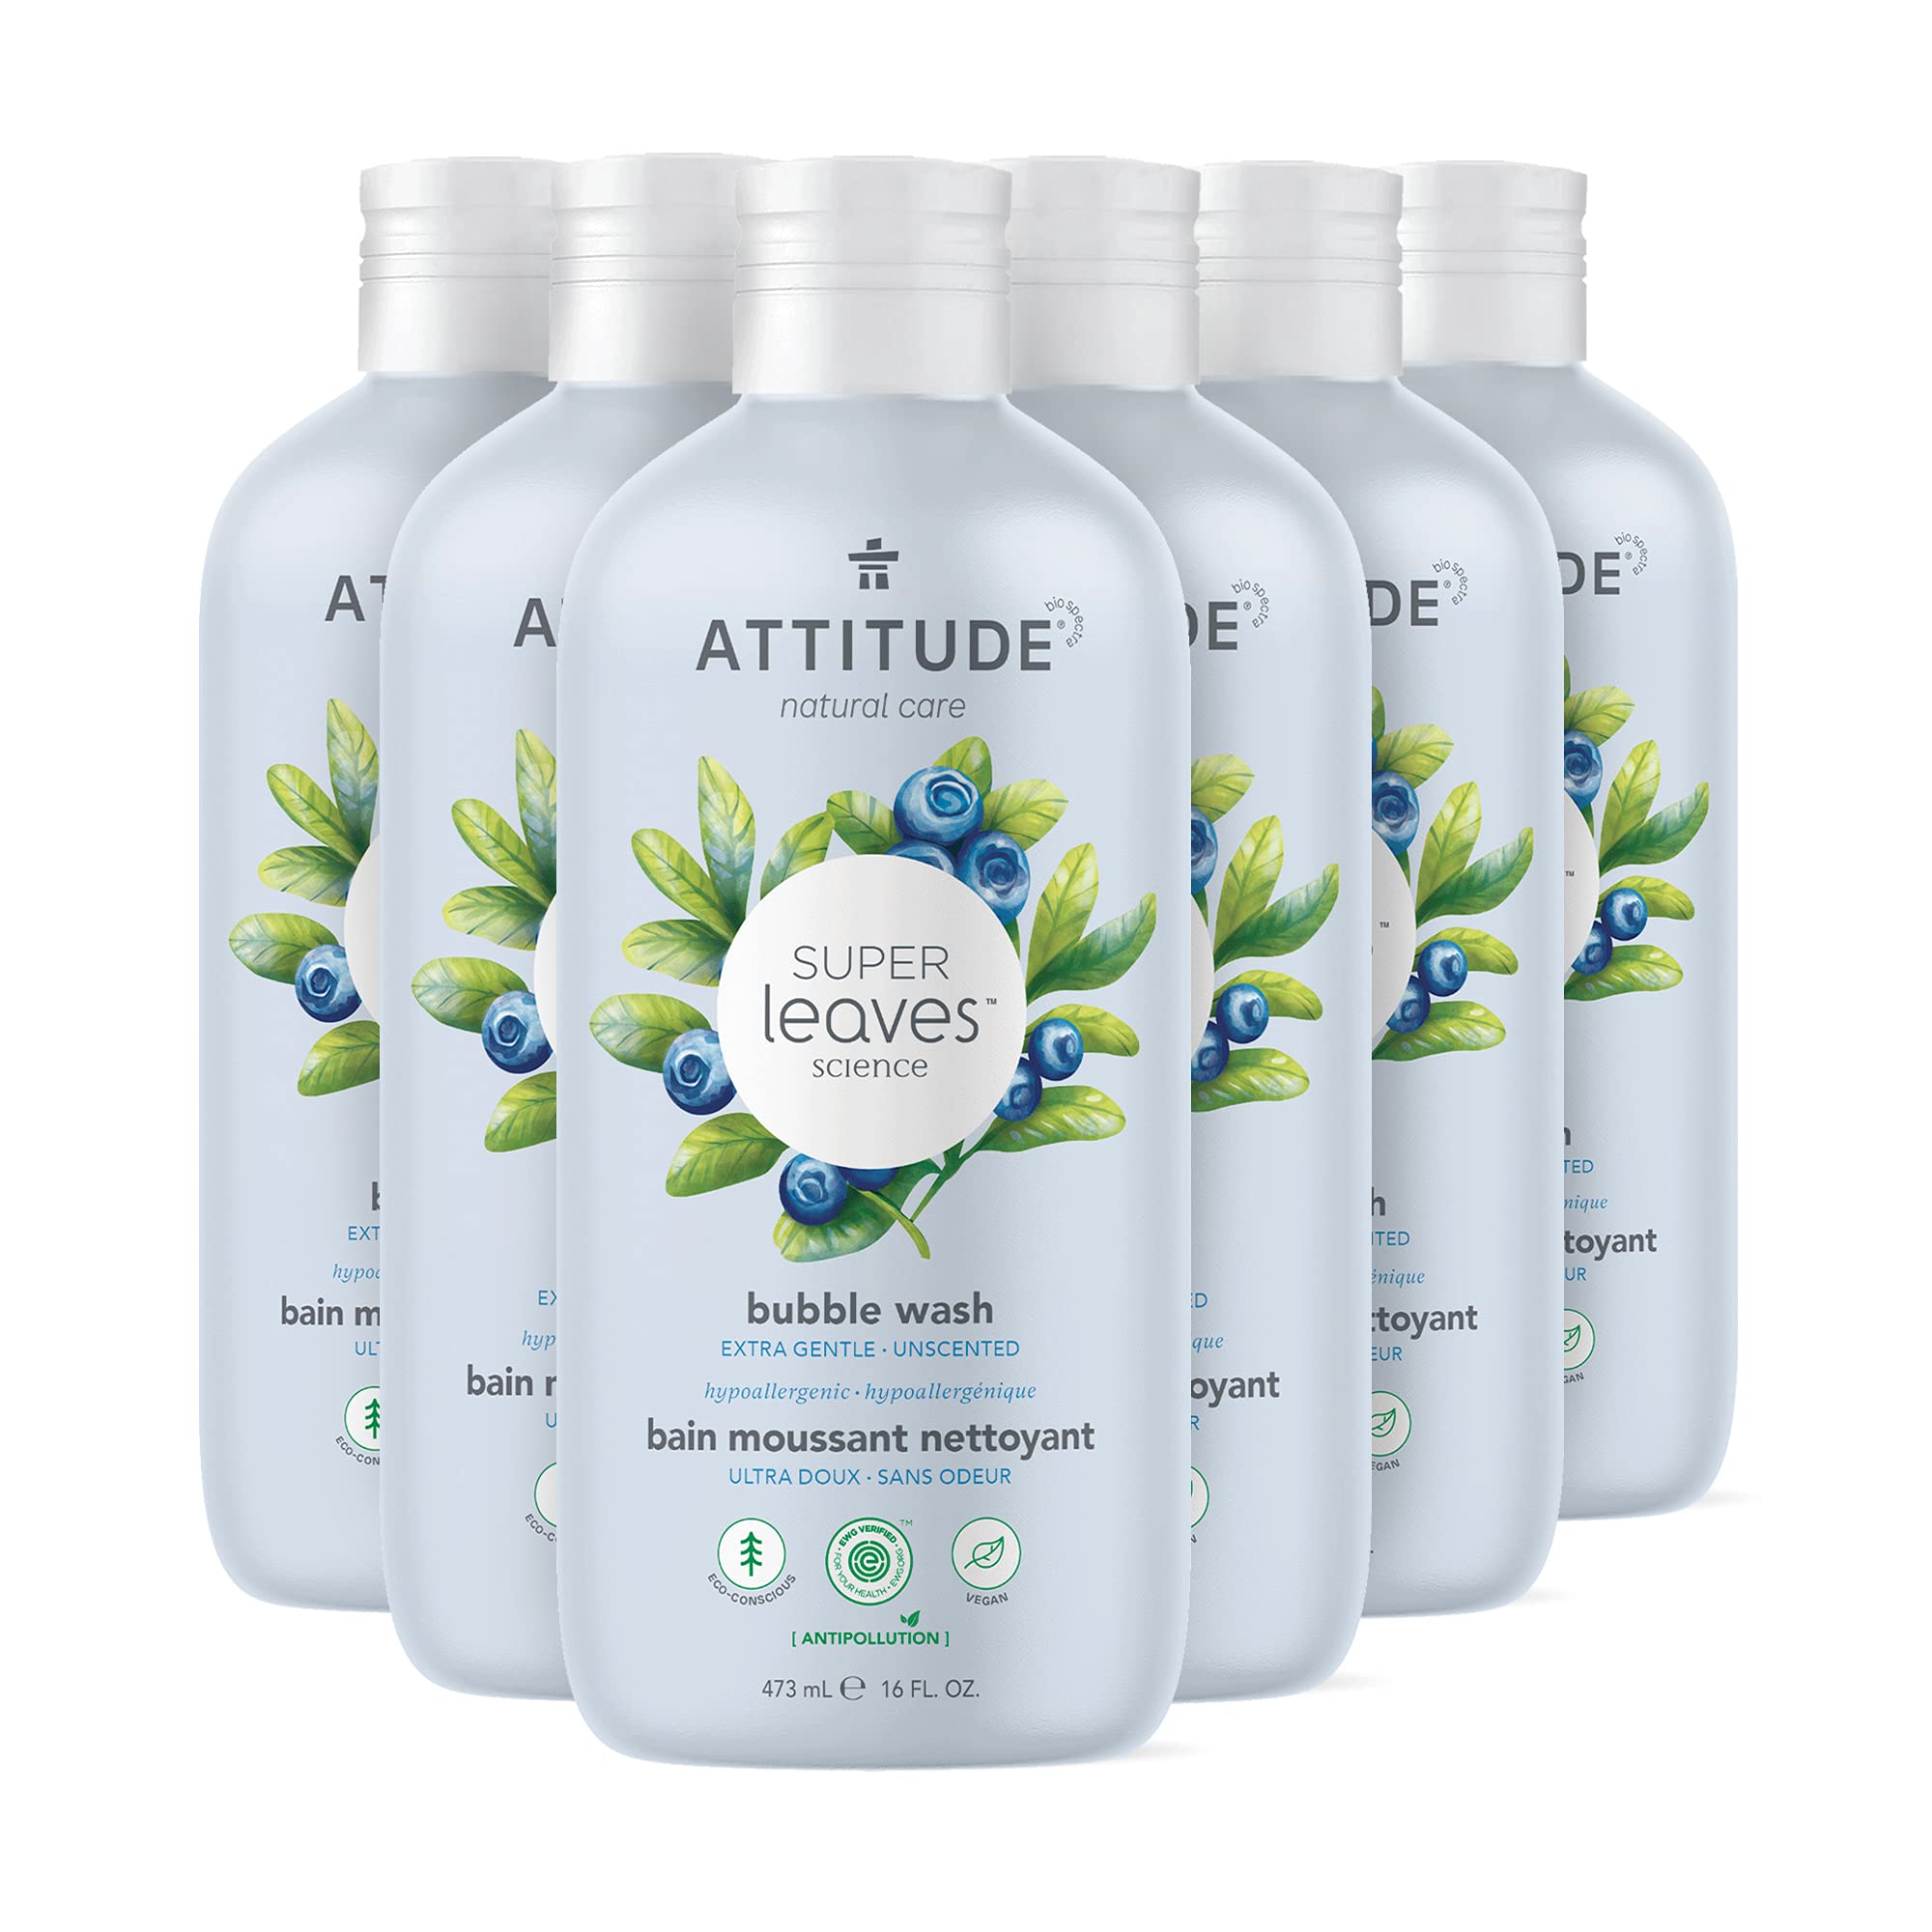 ATTITUDE Bubble Bath, Plant and Mineral-Based Ingredients, Dermatologist-Tested, Vegan and Cruelty-Free Body Care Products, Unscented, 16 Fl Oz (Pack of 6)